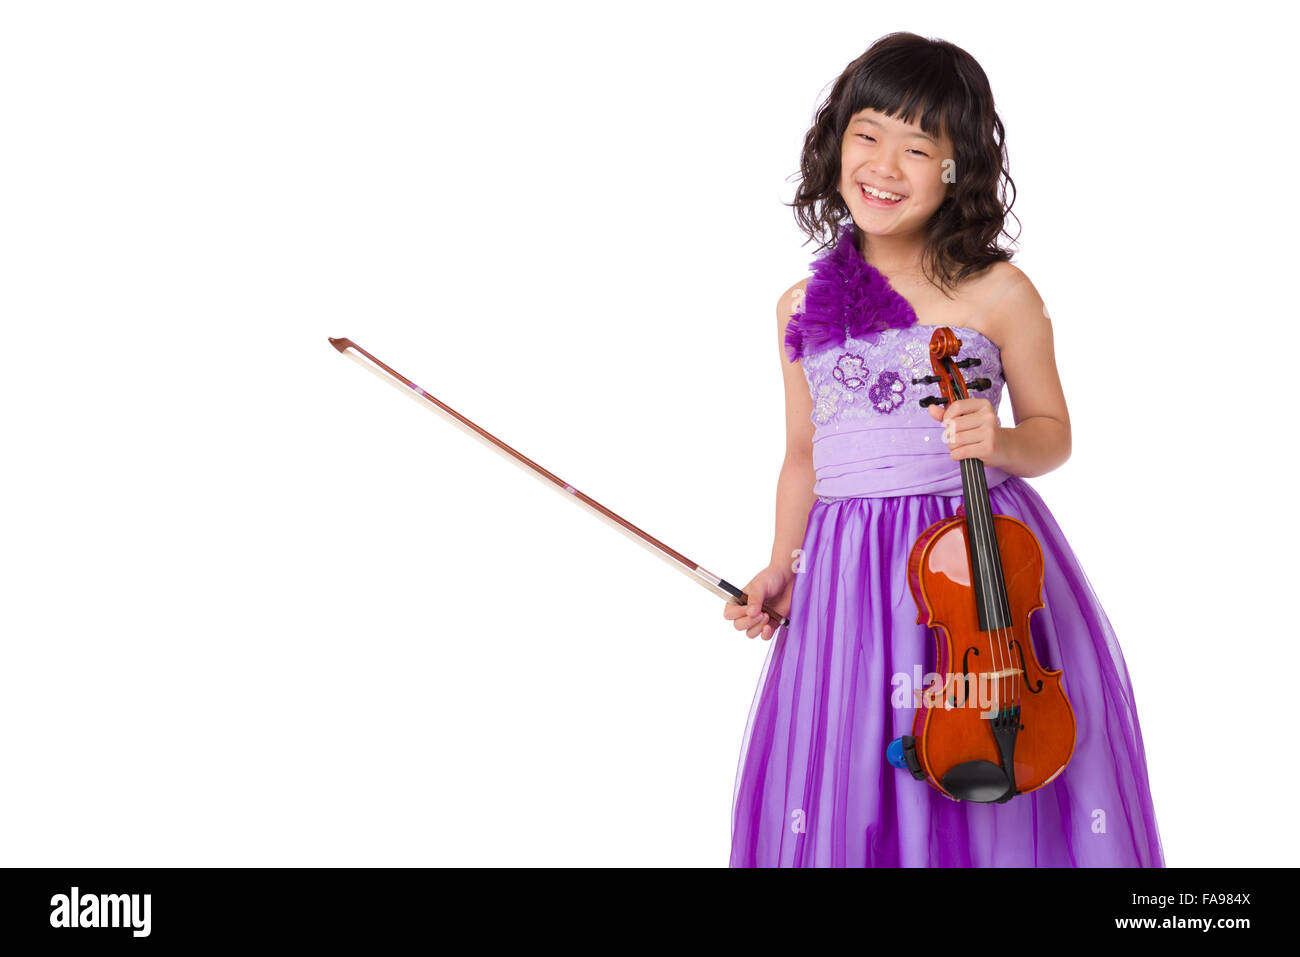 A portrait of a cute, happy and young Japanese girl in a purple dress on a white background with a violin. Stock Photo